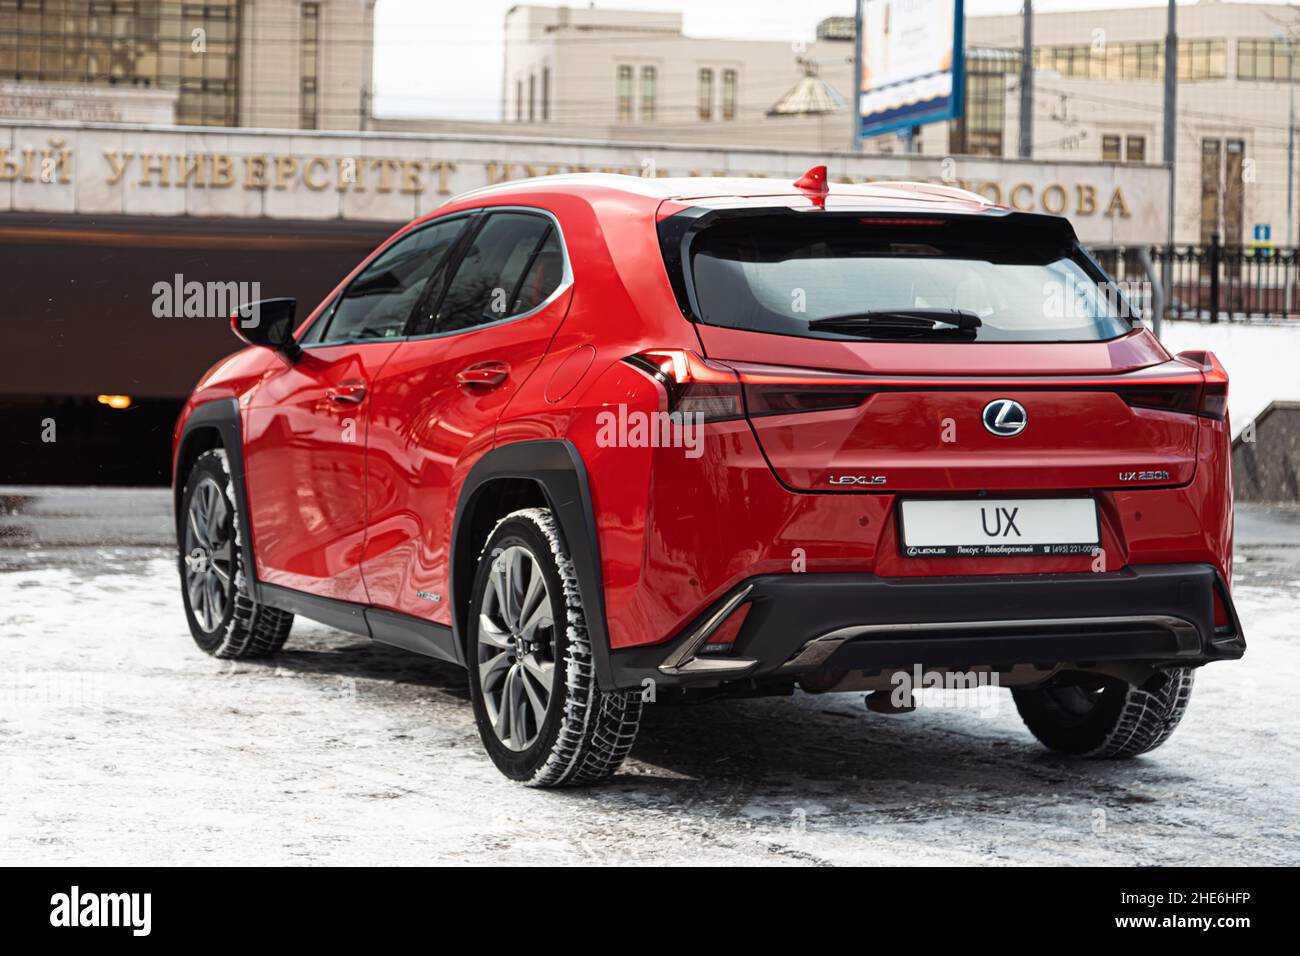 Russia, Moscow - February 05, 2020: Red premium crossover hatchback Lexus UX on the city streets. Hybrid car in winter Stock Photo